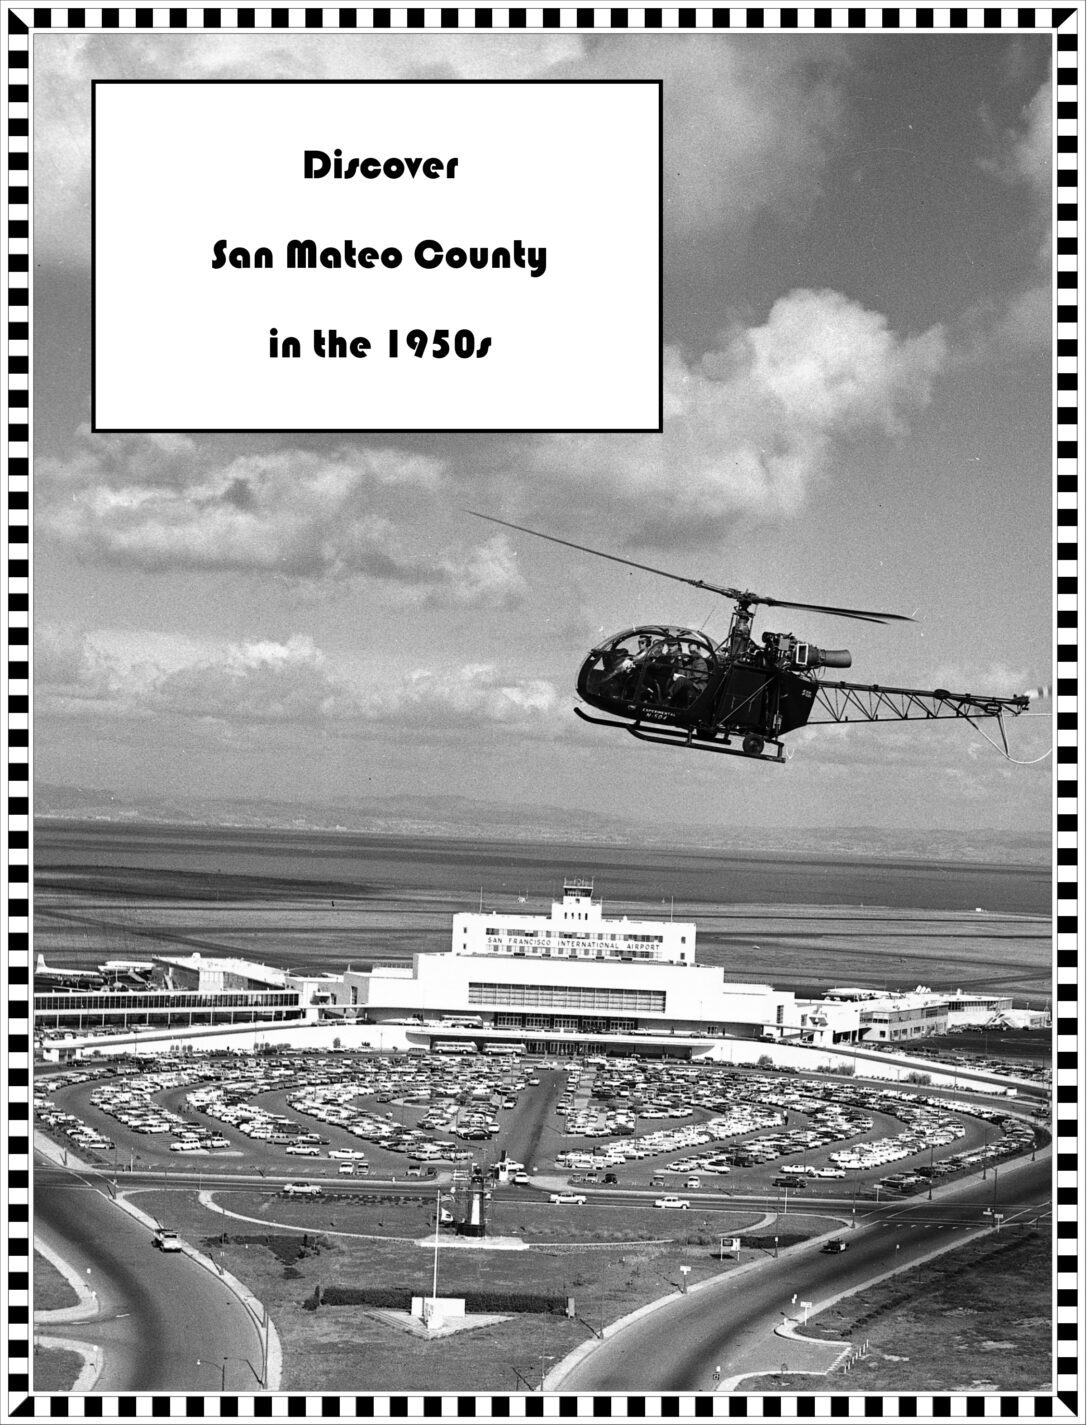 Cover of the Discover San Mateo County in the 1950s activity book featuring an image of a helicopter over San Francisco International Airport